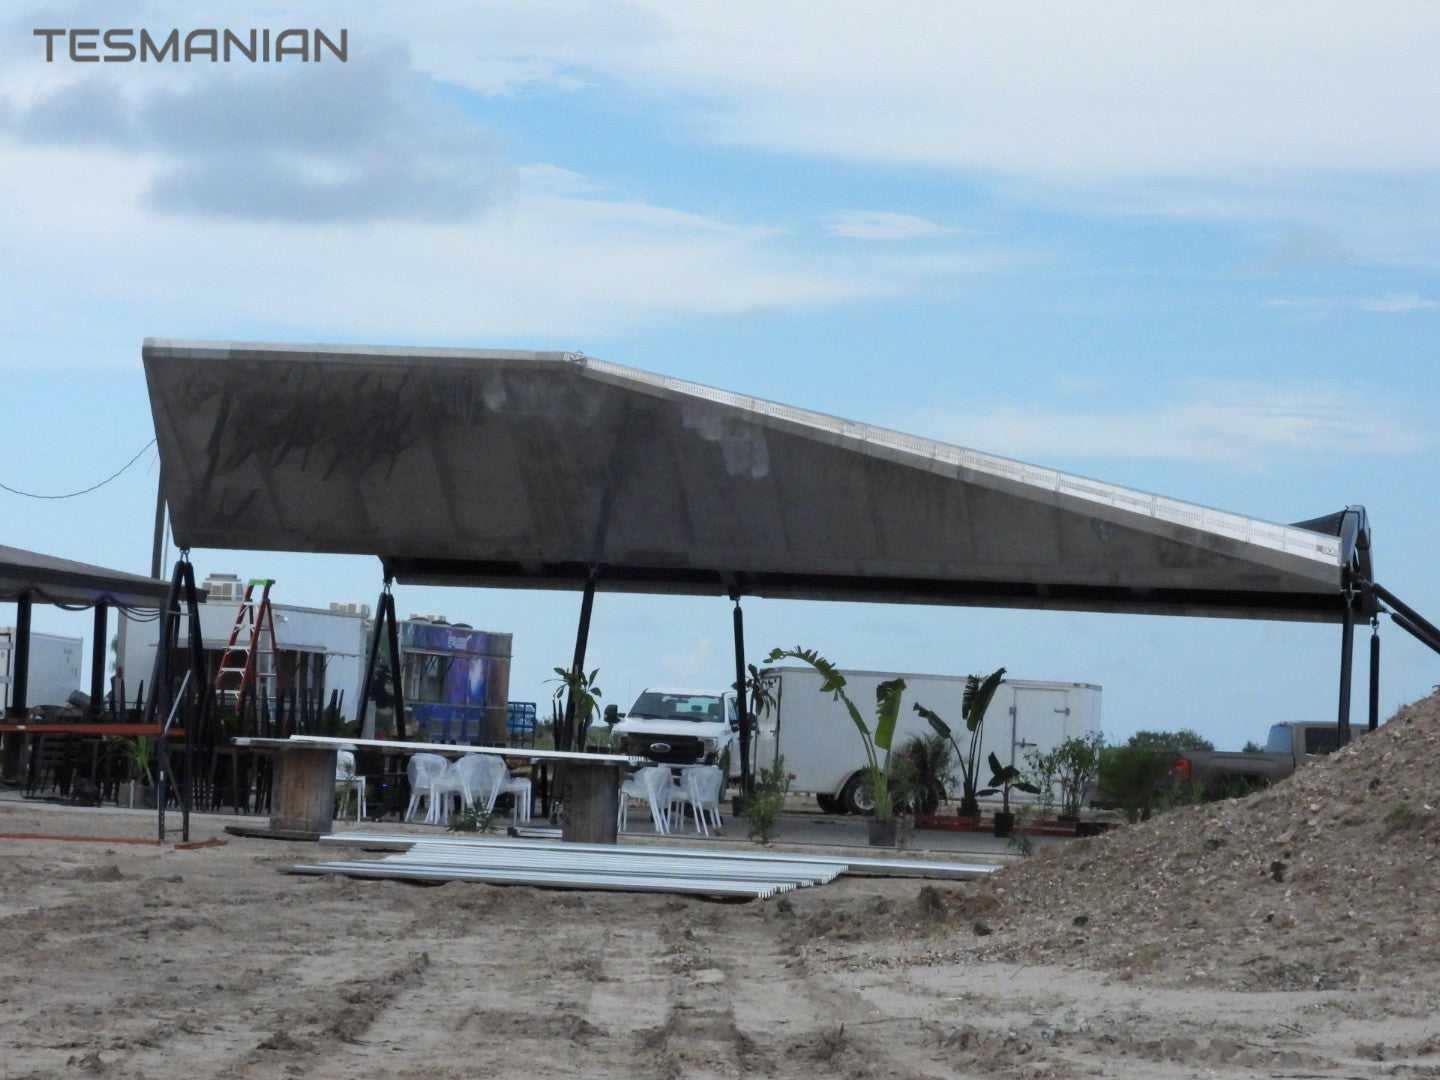 SpaceX 'Stainless-steel' Restaurant under construction as Starship SN5's test flight approaches